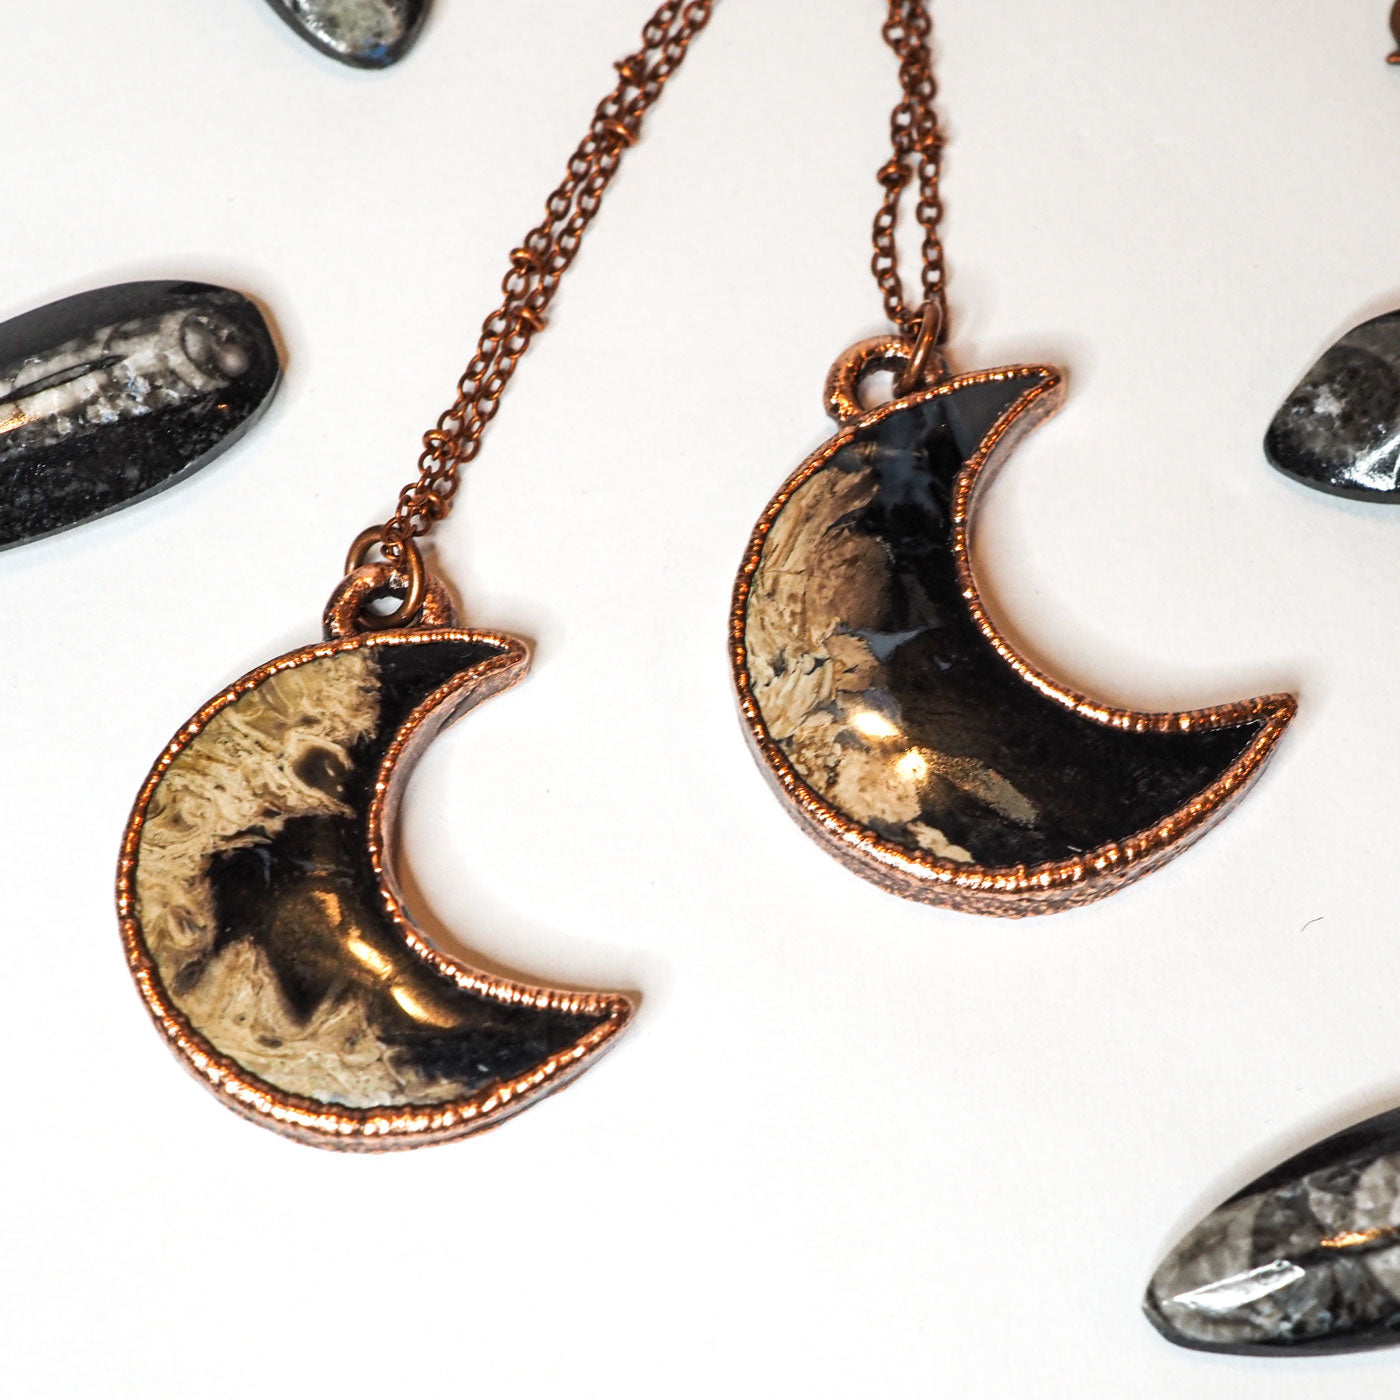 2 moon-shaped copper electroformed pendants featuring petrified palm wood on copper chains